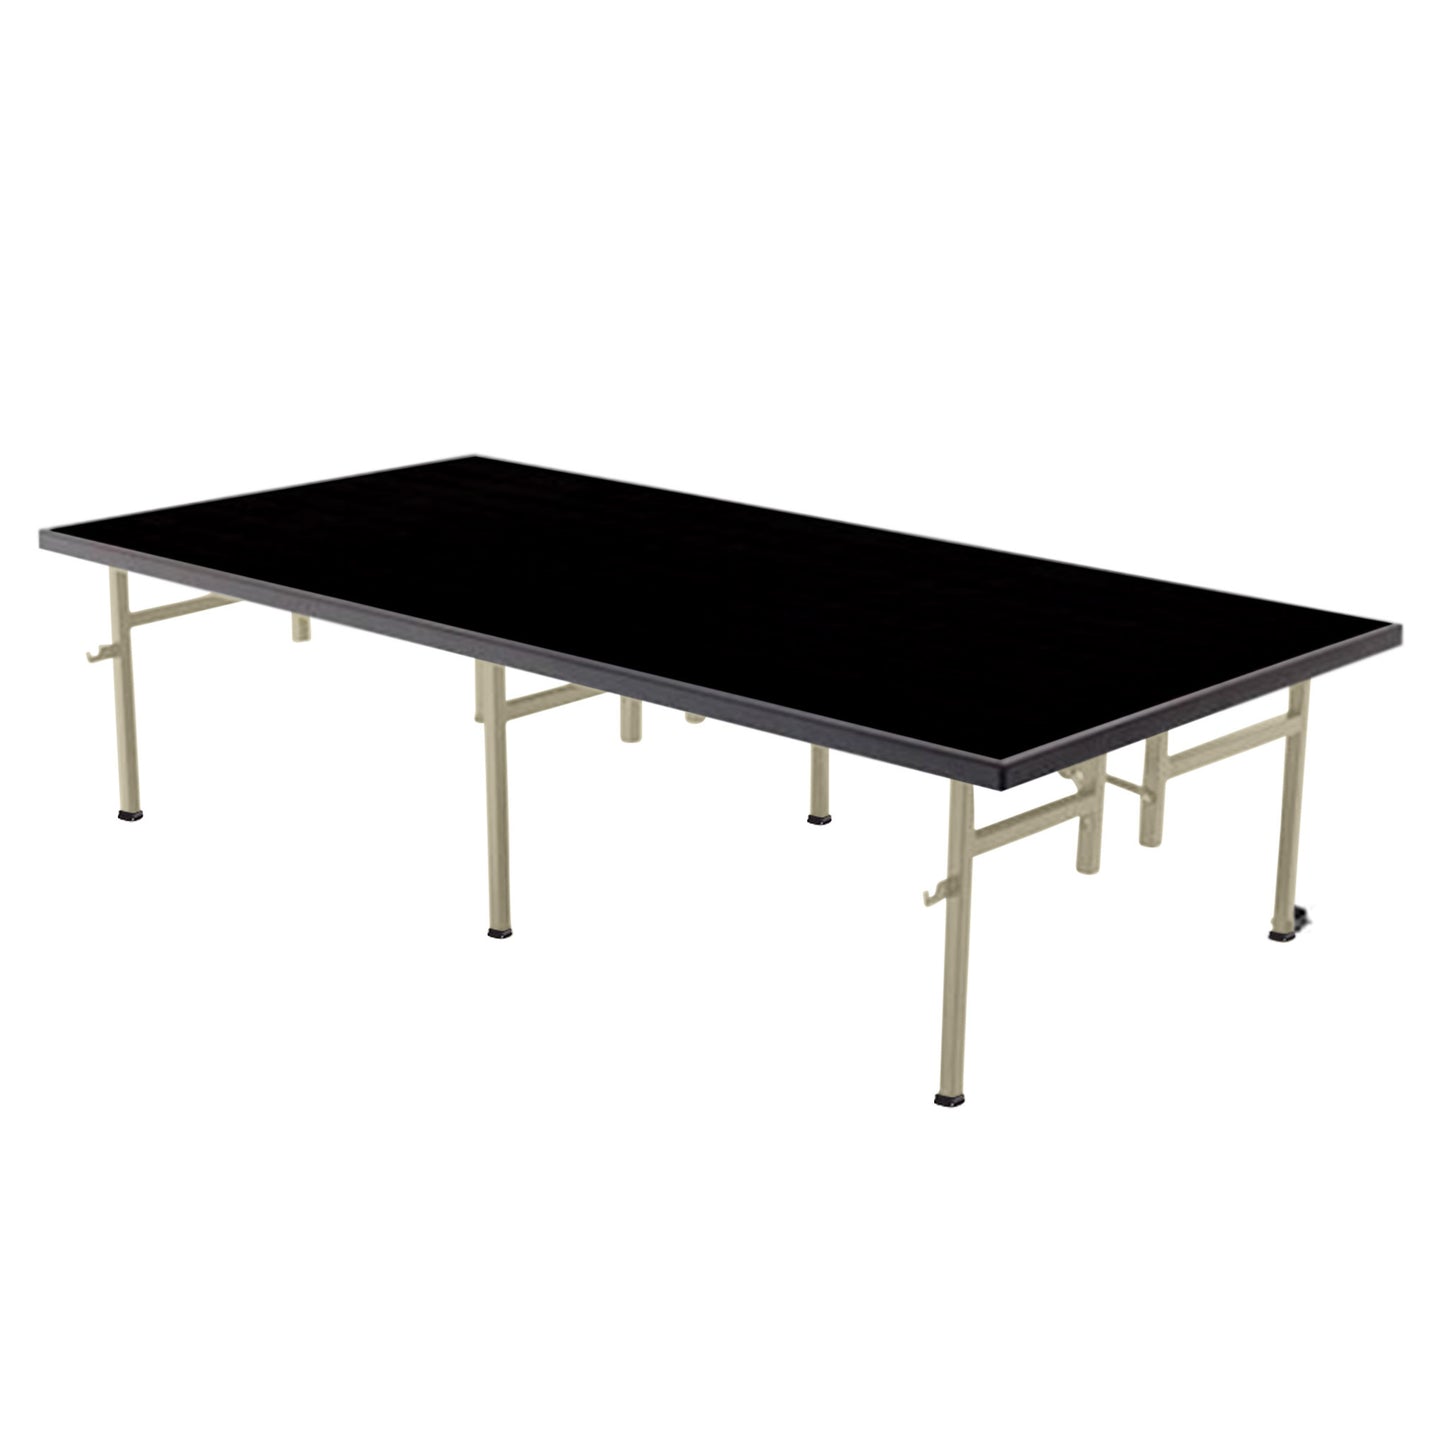 AmTab Fixed Height Stage - Polypropylene Top - 48"W x 72"L x 24"H  (AmTab AMT-ST4624P)